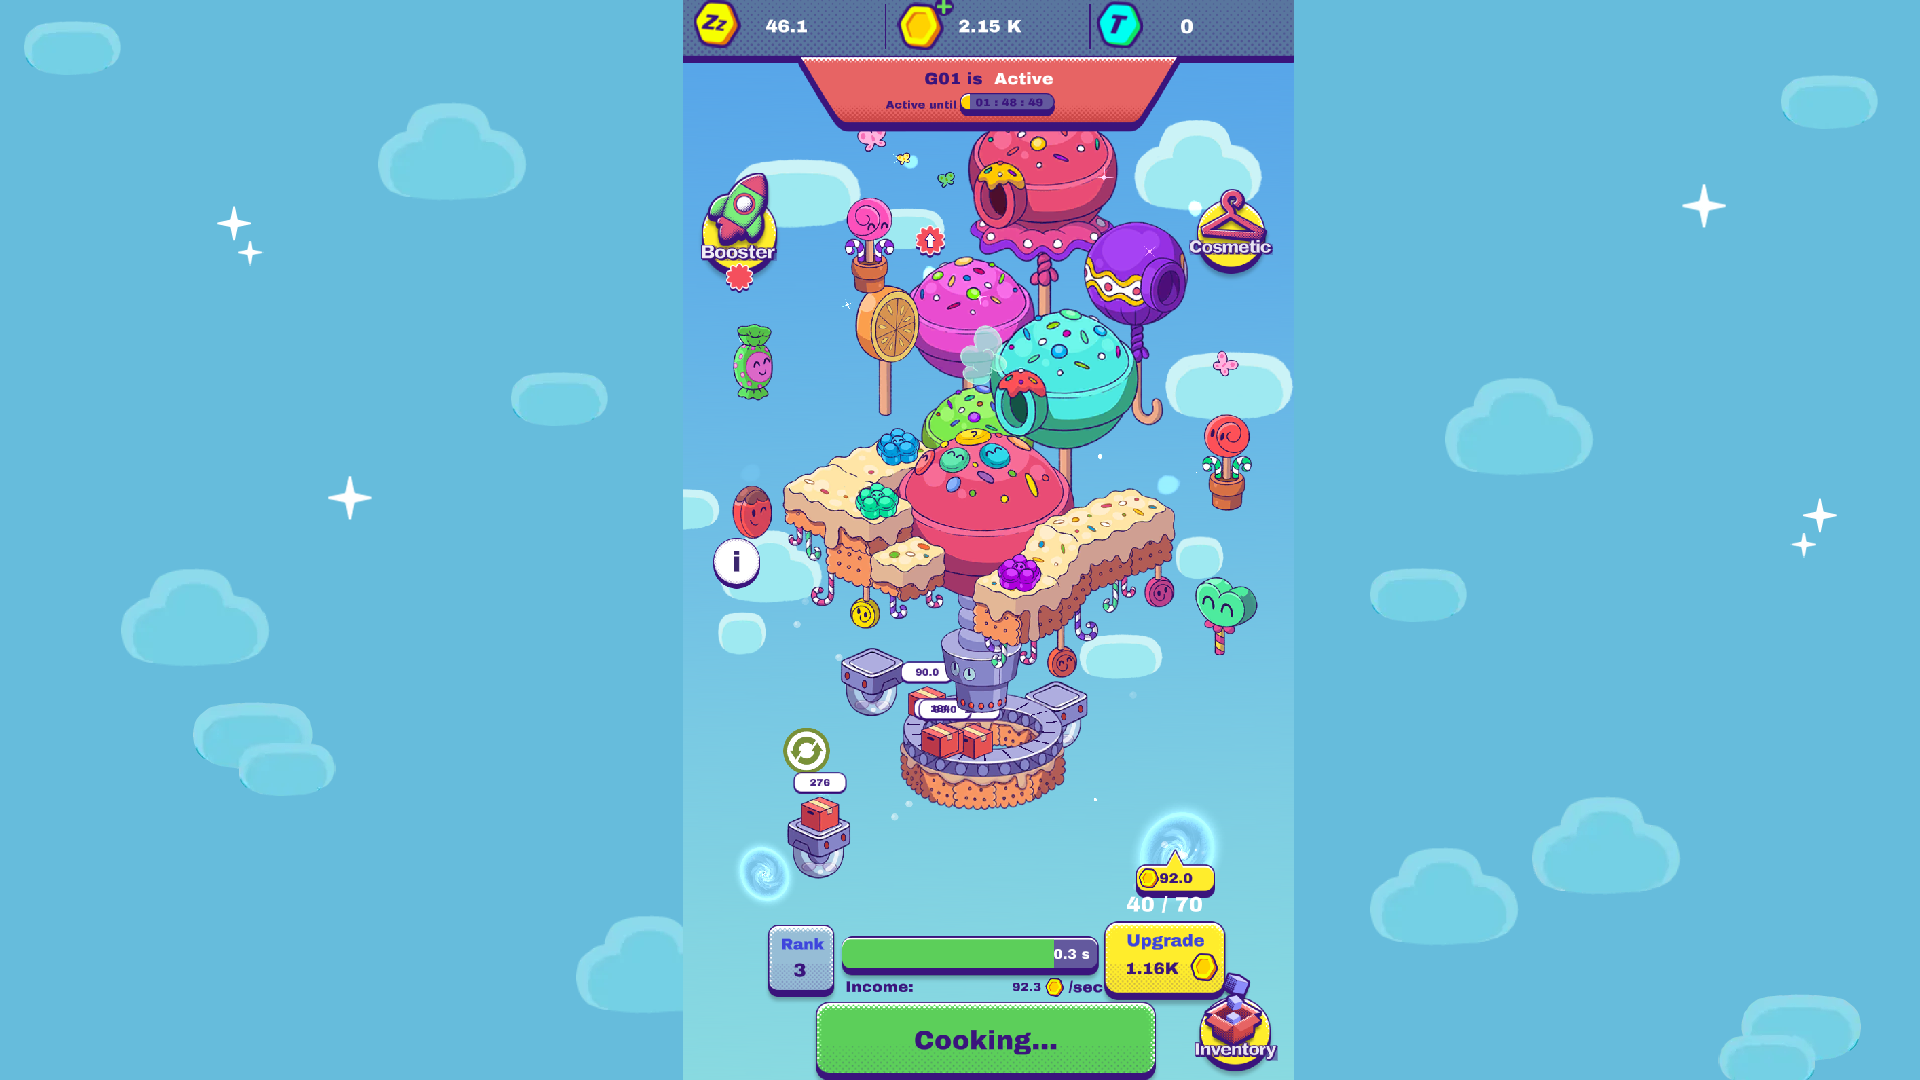 game image from ZipClash